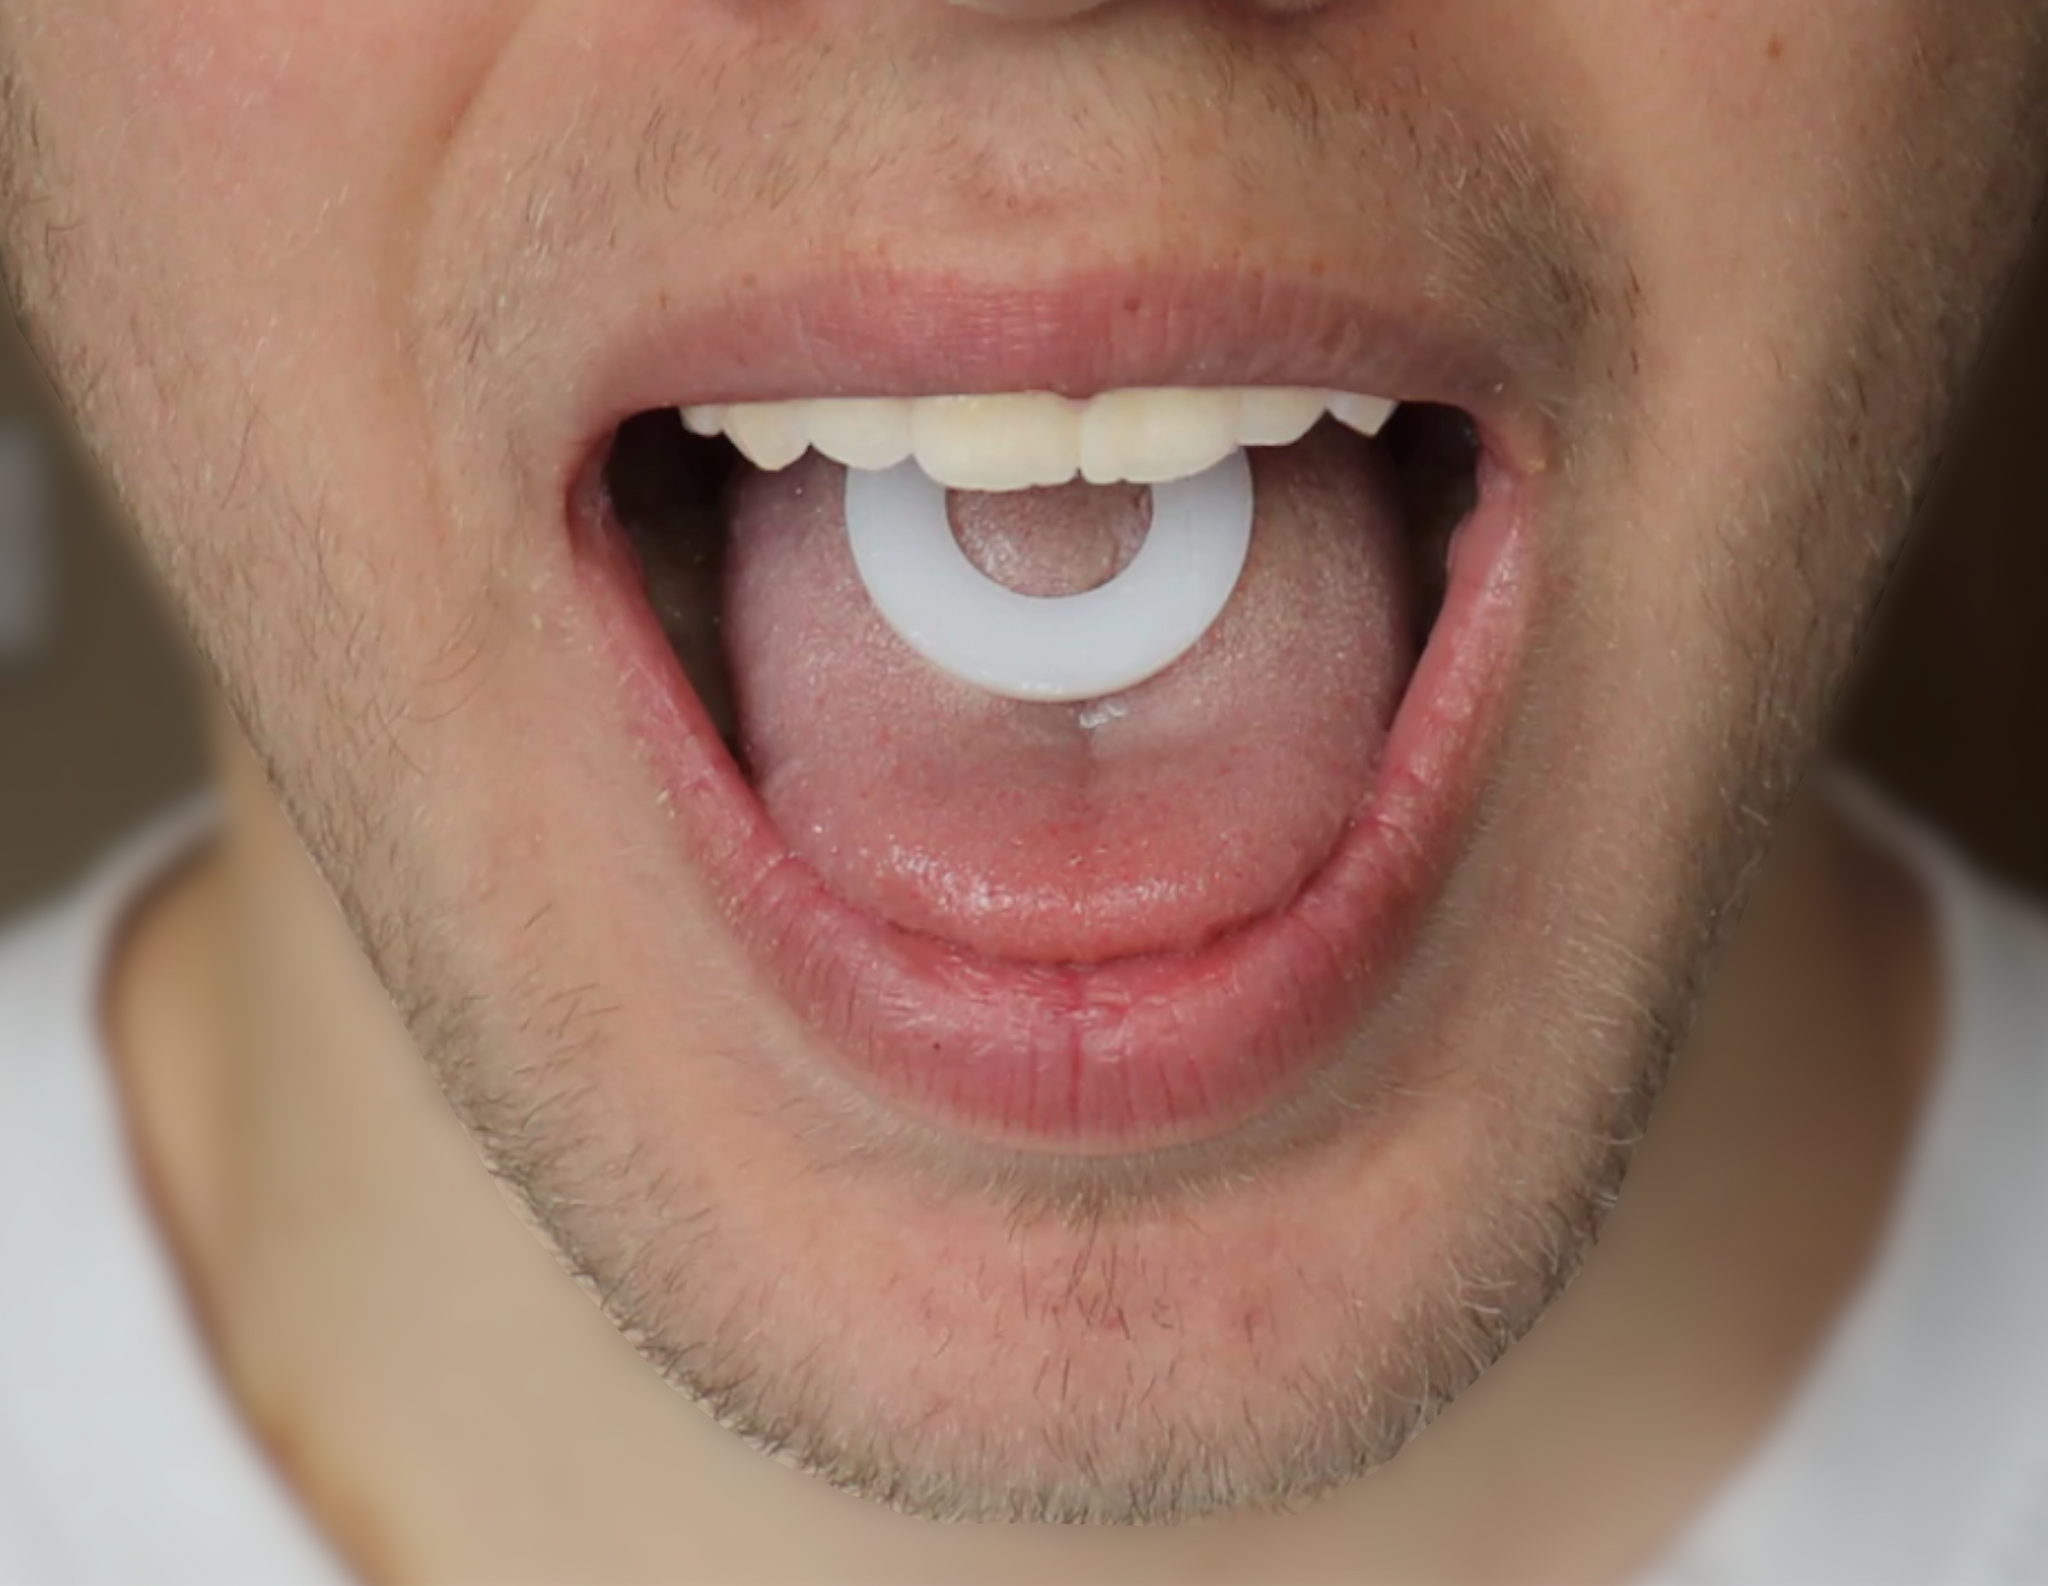 Mewing Ring - A device that improves your facial appearance